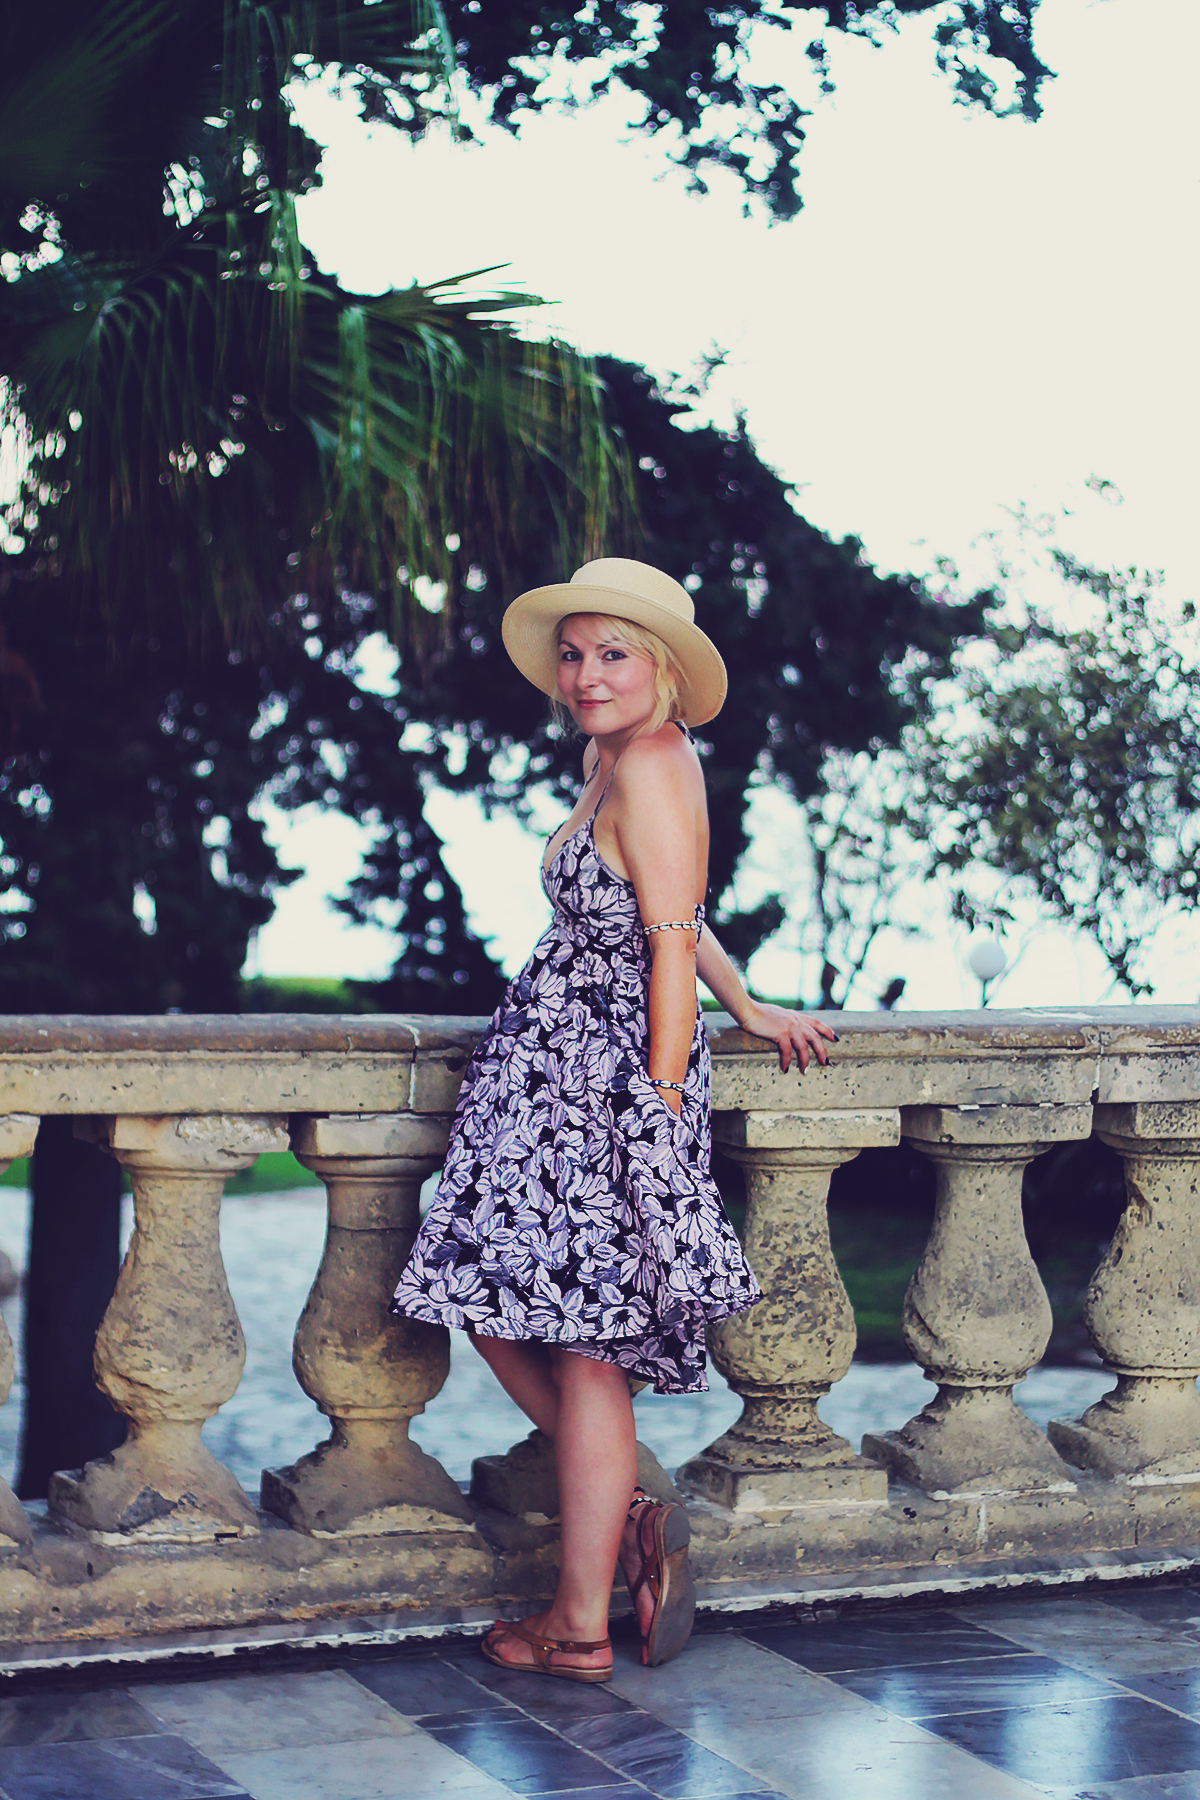 Corfu Town, travel post, travel style, Summer style, floral dress, flat sandals, shell bracelets, straw hat